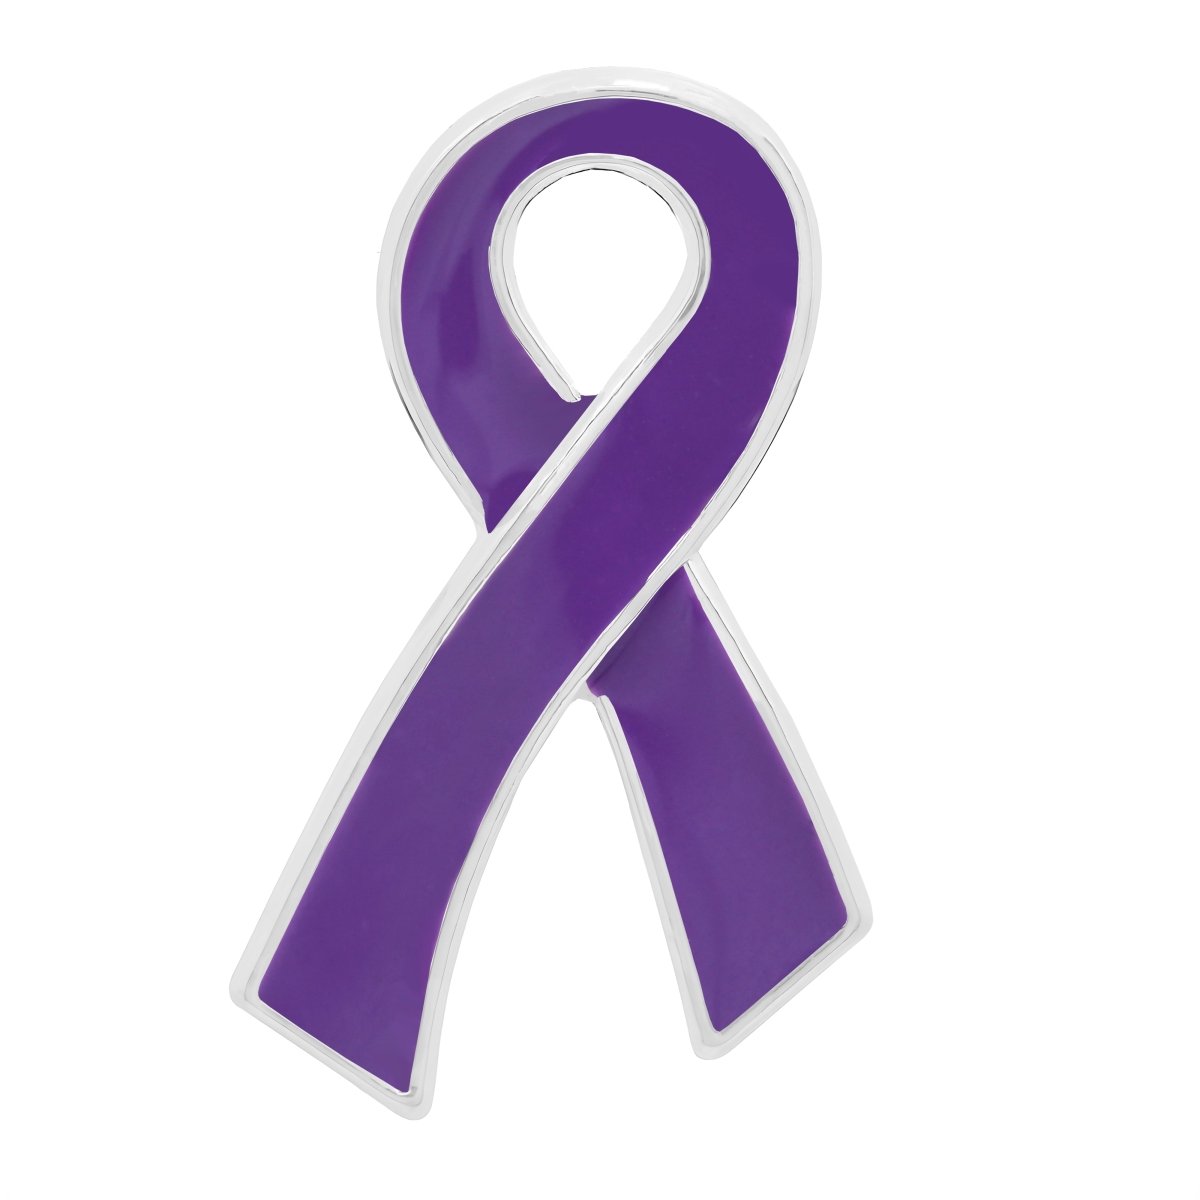 Large Flat Colitis Awareness Ribbon Pins - Fundraising For A Cause